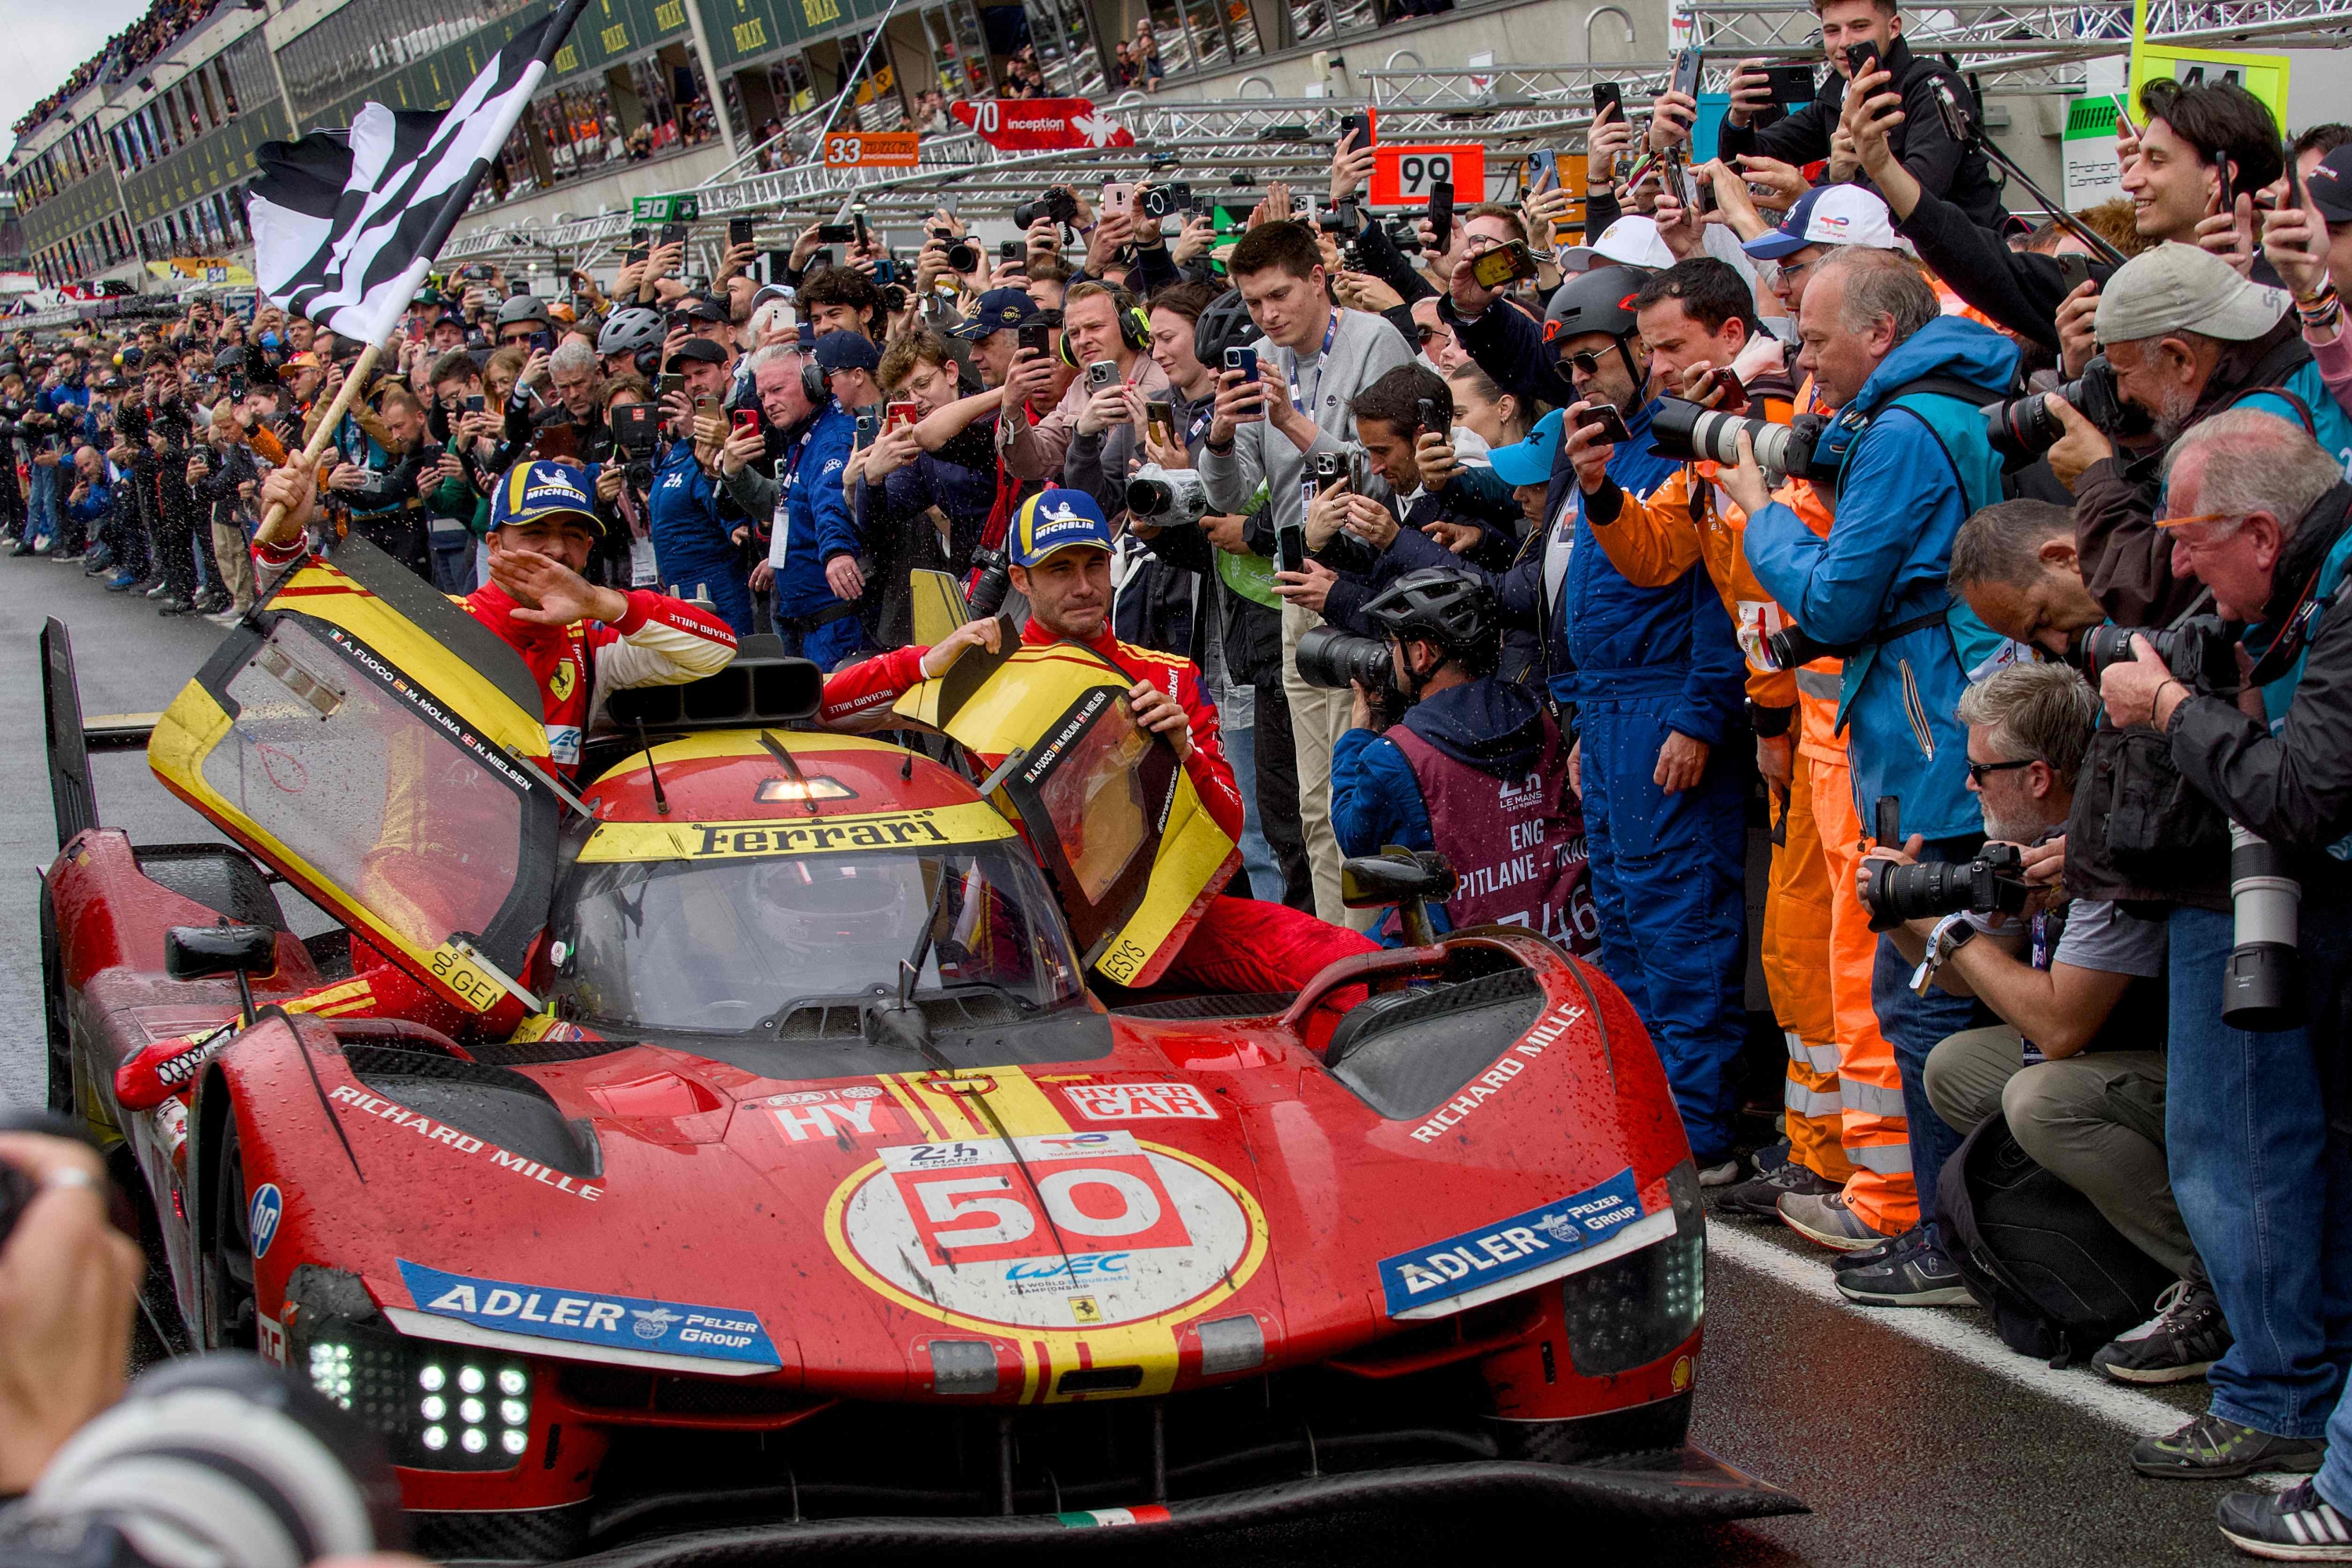 Ferrari 499P Hybrid Hypercar WEC's team, Spanish driver Miguel Molina (R) Italian driver Antonio Fuoco (L) and Danish driver Nicklas Nielsen (in the car) celebrate after winning Le Mans 24-hours endurance race in Le Mans, western France, on June 16, 2024. Ferrari won a wild and wet 92nd edition of the Le Mans 24 Hours race on June 16, 2024, as Nicklas Nielsen took the chequered flag after a vintage and gruelling race, the Dane sharing driving duties in the Italian constructor's No 50 car with Italian Antonio Fuoco and Spaniard Miguel Molina. (Photo by GUILLAUME SOUVANT / AFP)